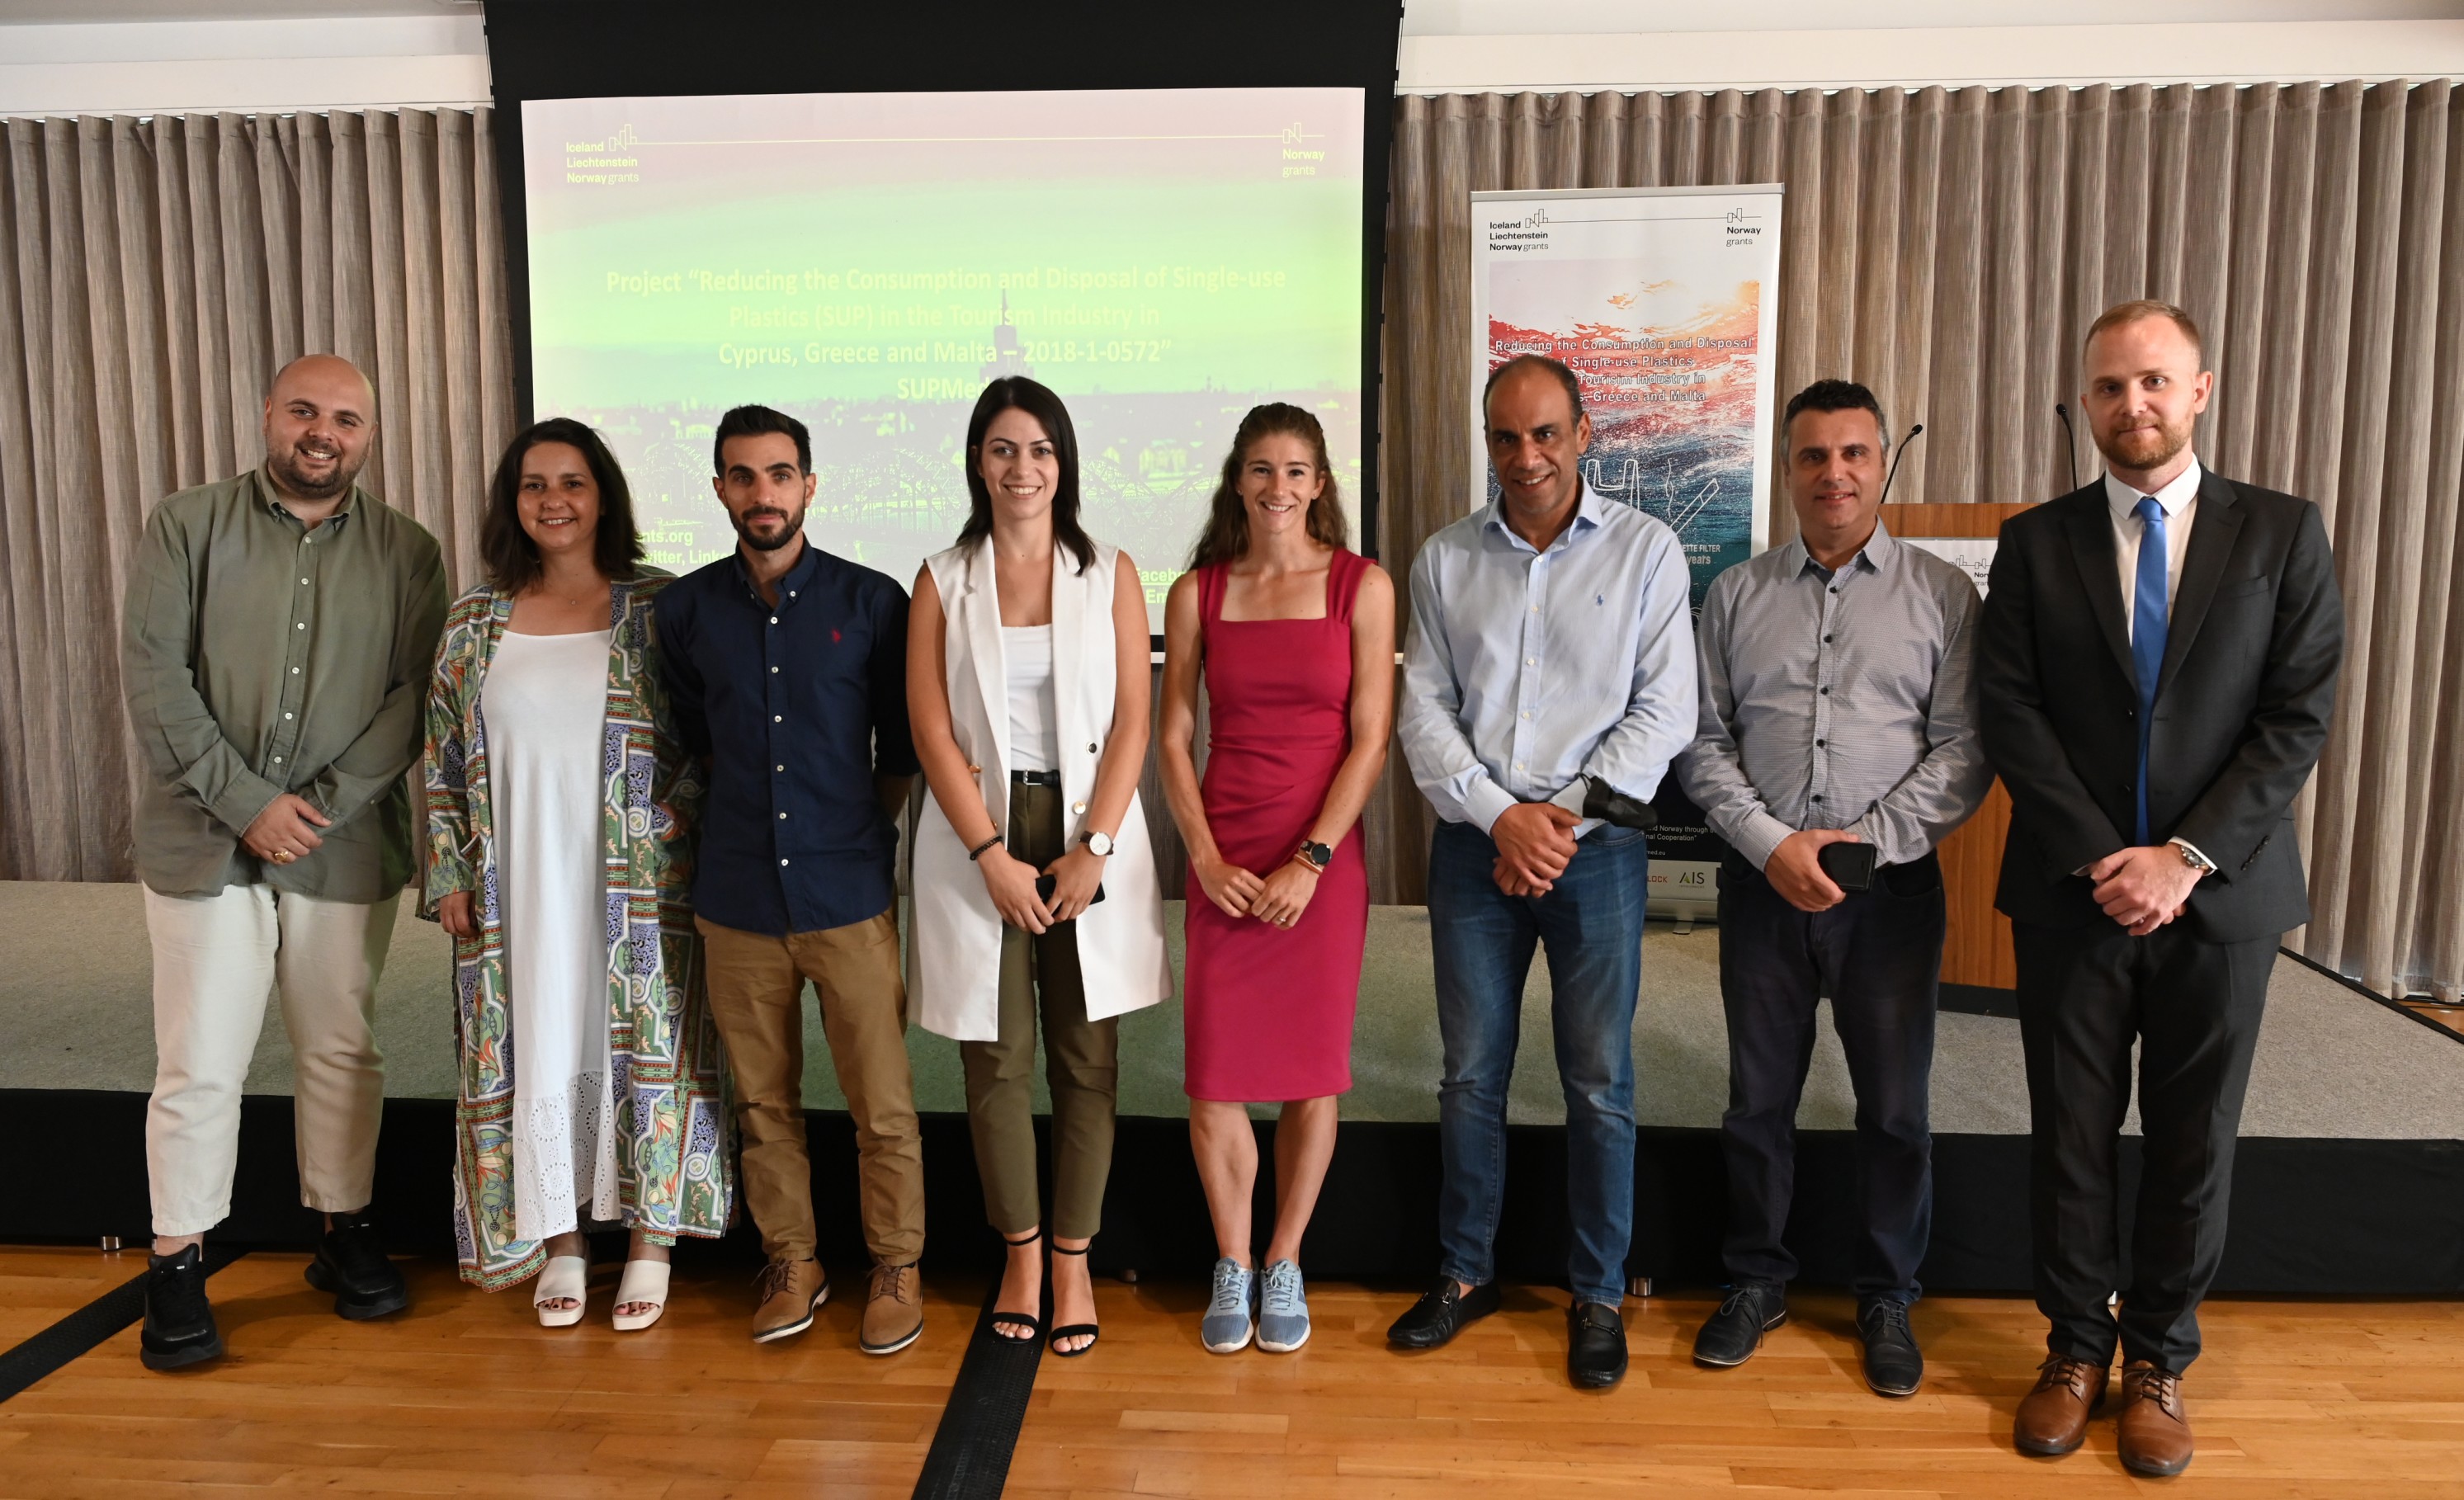 The 1st conference event of SUPMed project has been successfully implemented in Malta